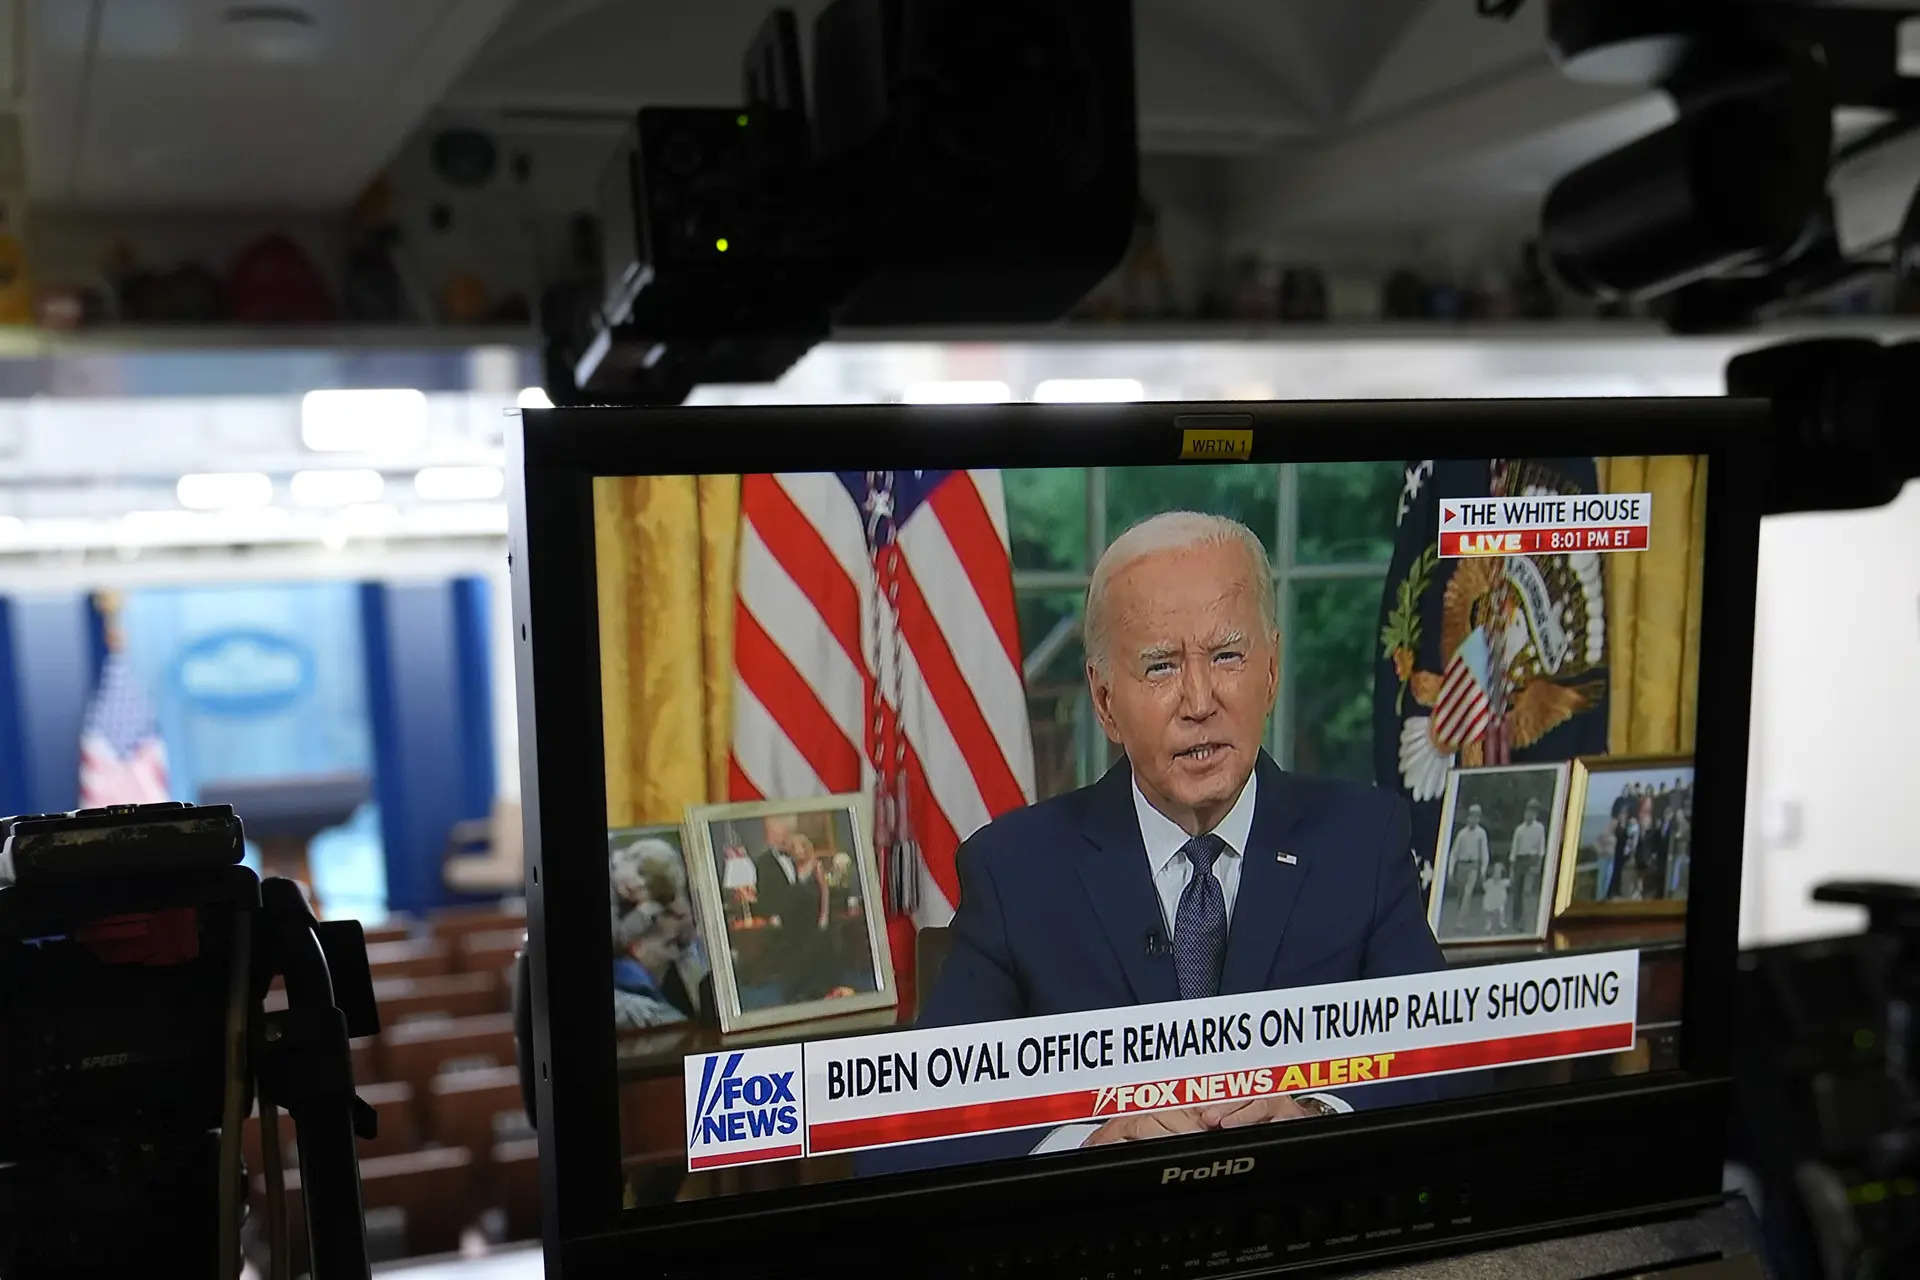 Trump Assassination News Updates Live: Biden says 'we cannot, we must not' go down road of political violence 